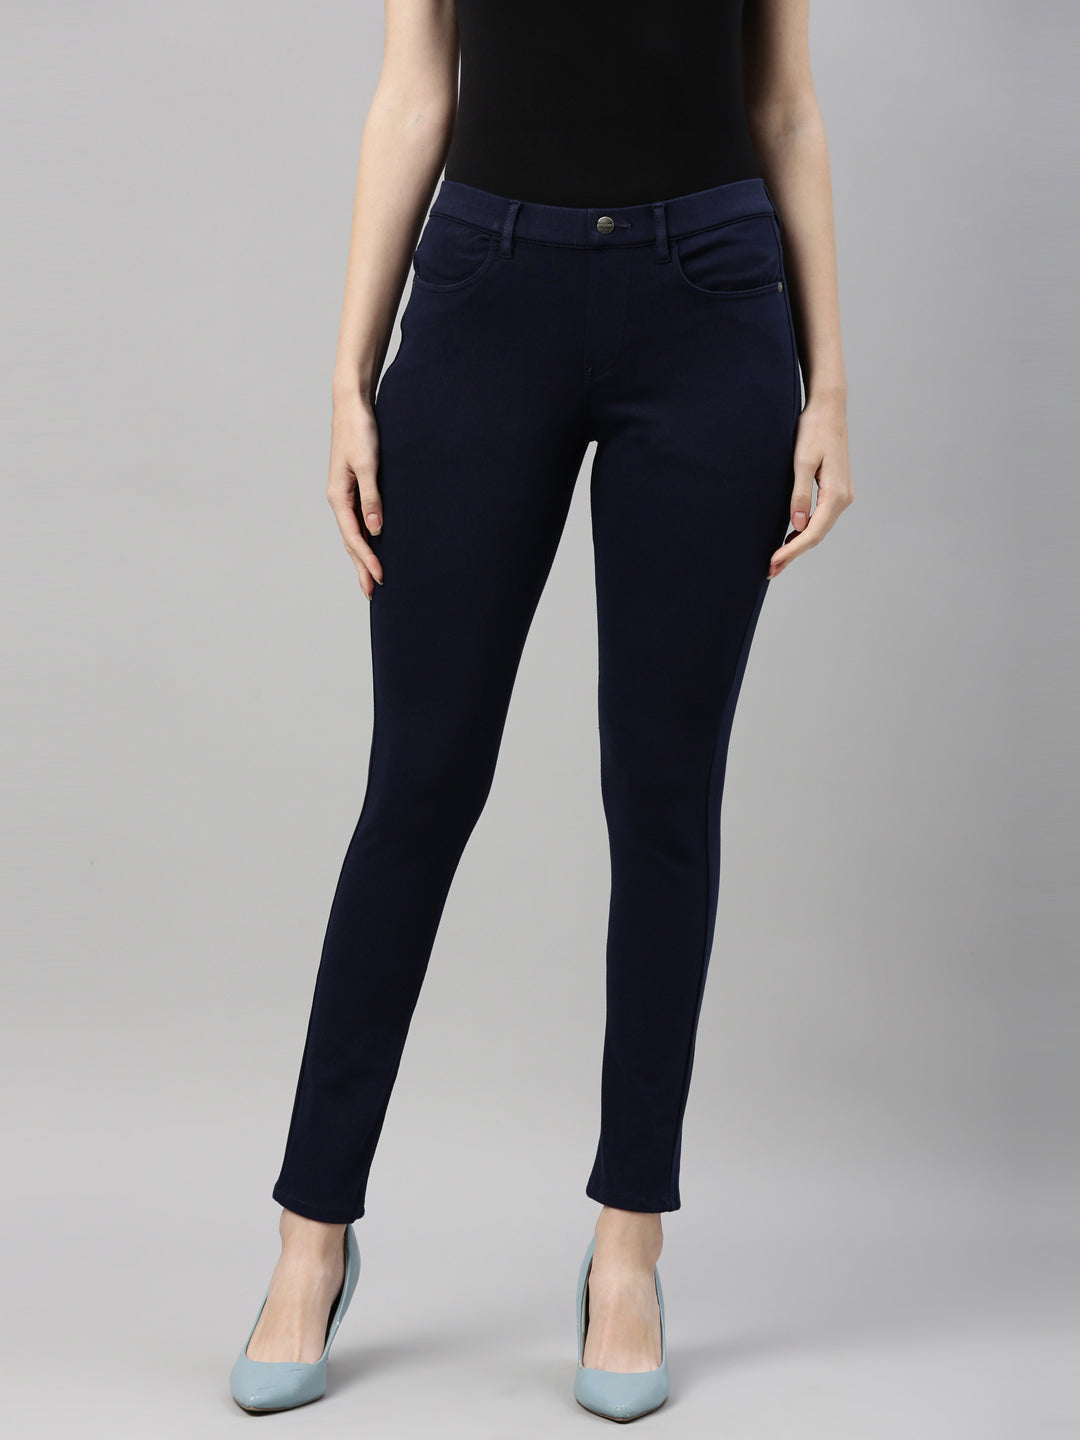 NEW LADIES SKINNY FIT COLOURED STRETCHY JEANS WOMENS JEGGINGS